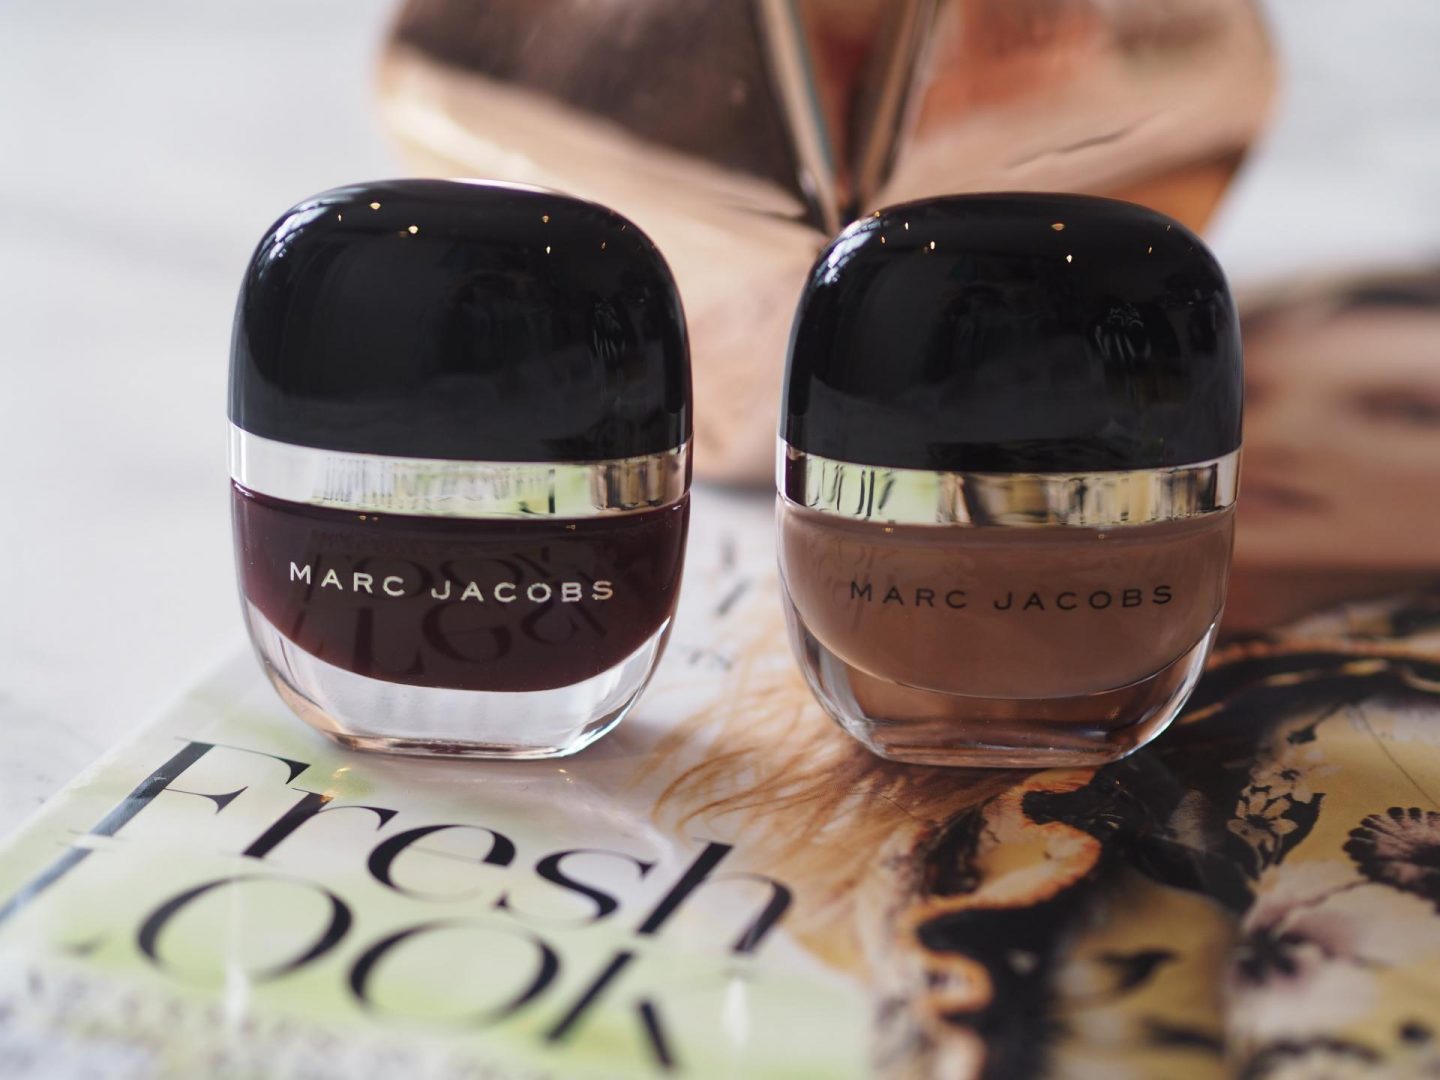 November Beauty Favourites - Product: Marc Jacobs Enamored Hi-Shine Nail Lacquer in Ladies Night and Trax